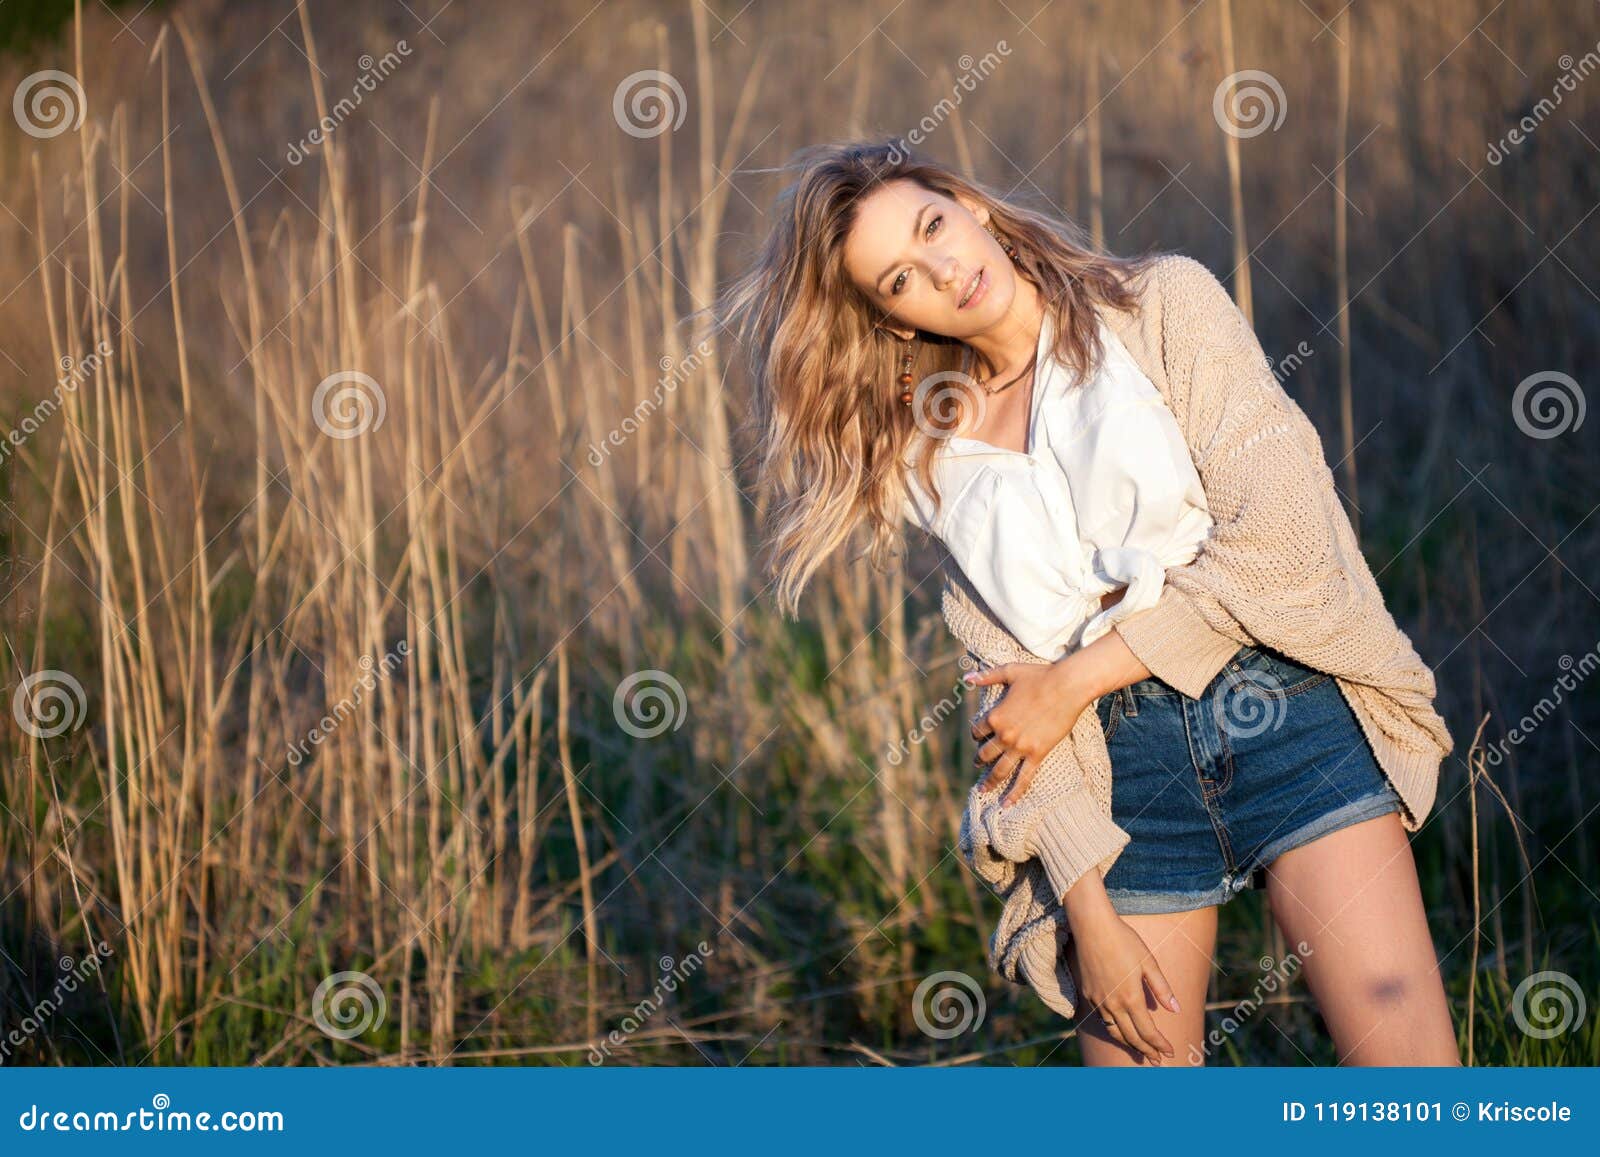 Cute Charming Girl in Summer in the Field. Young Woman is Happy and ...